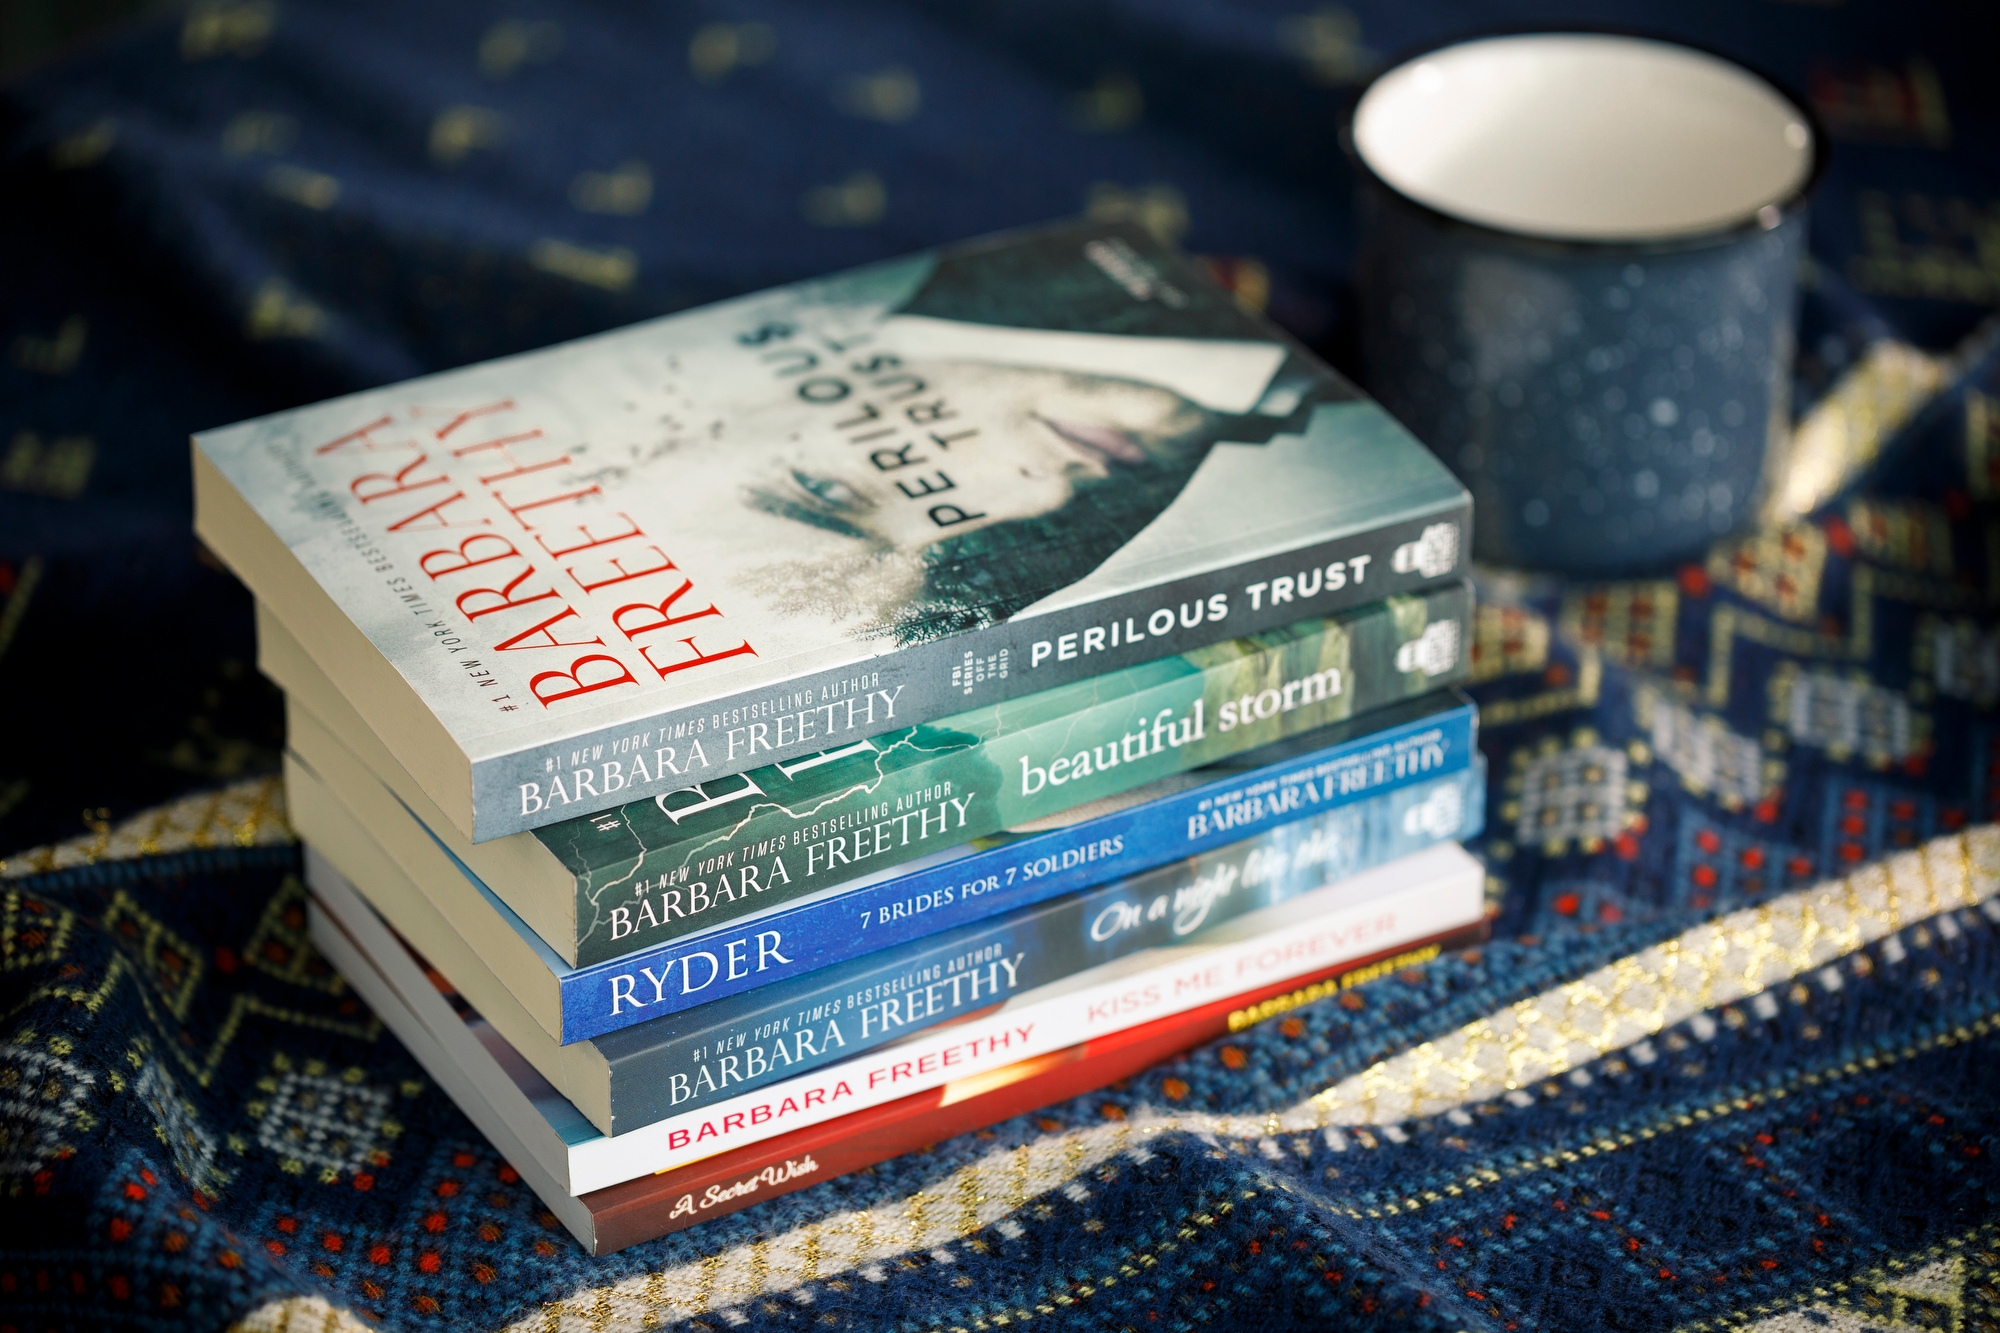 A stack of novels by Amazon author Barbara Freethy sits on a blue tablecloth. A blue coffee cup is in the background. 